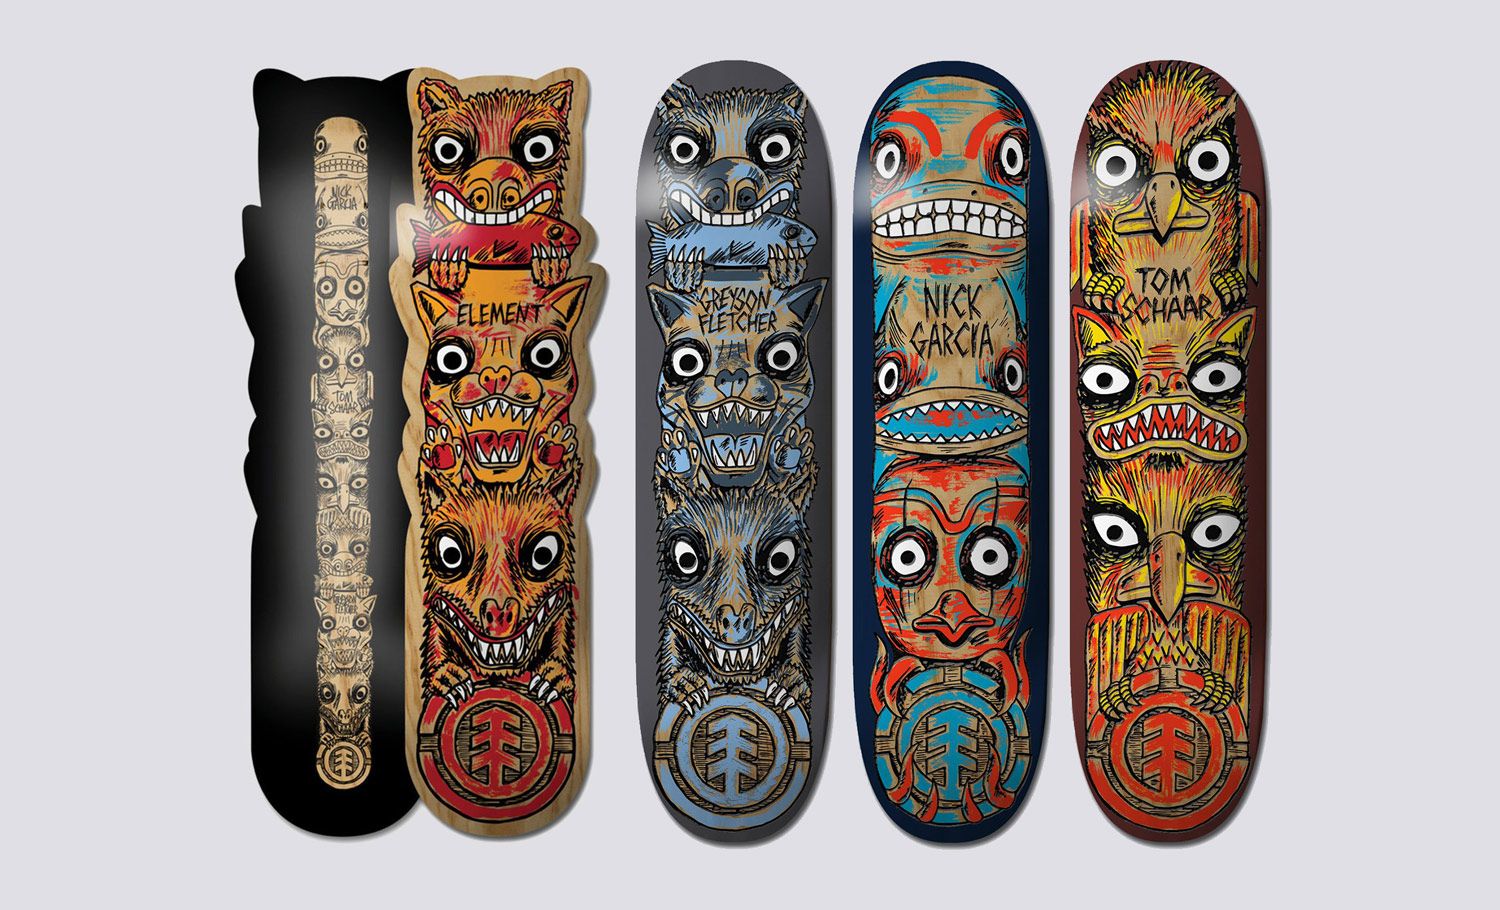 Drafts, final sketch and printed Totem series made by Fos for Element Skateboards, 2019